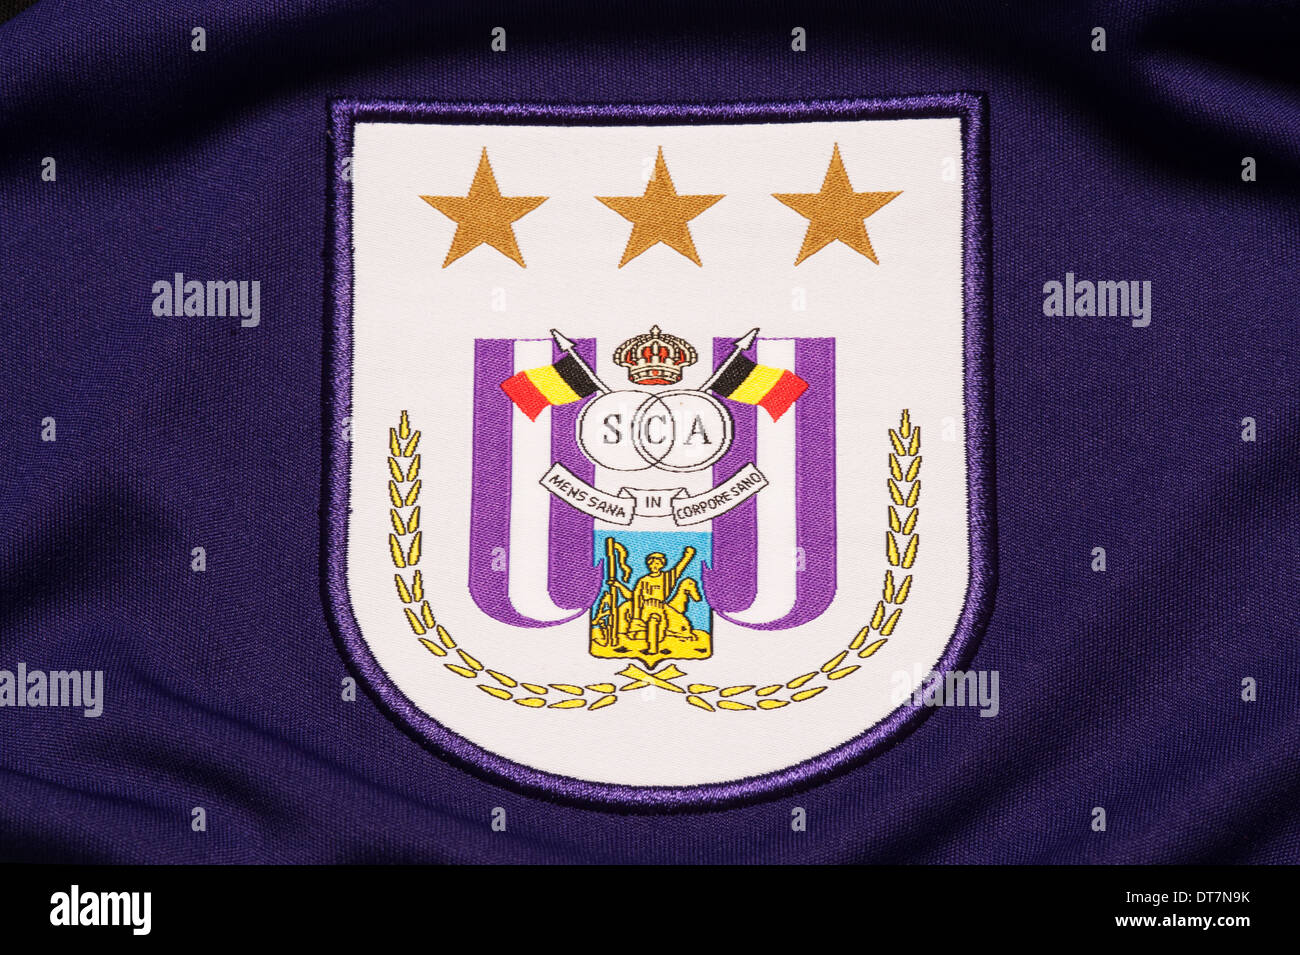 Close up of Royal Sporting Club Anderlecht football kit Stock Photo